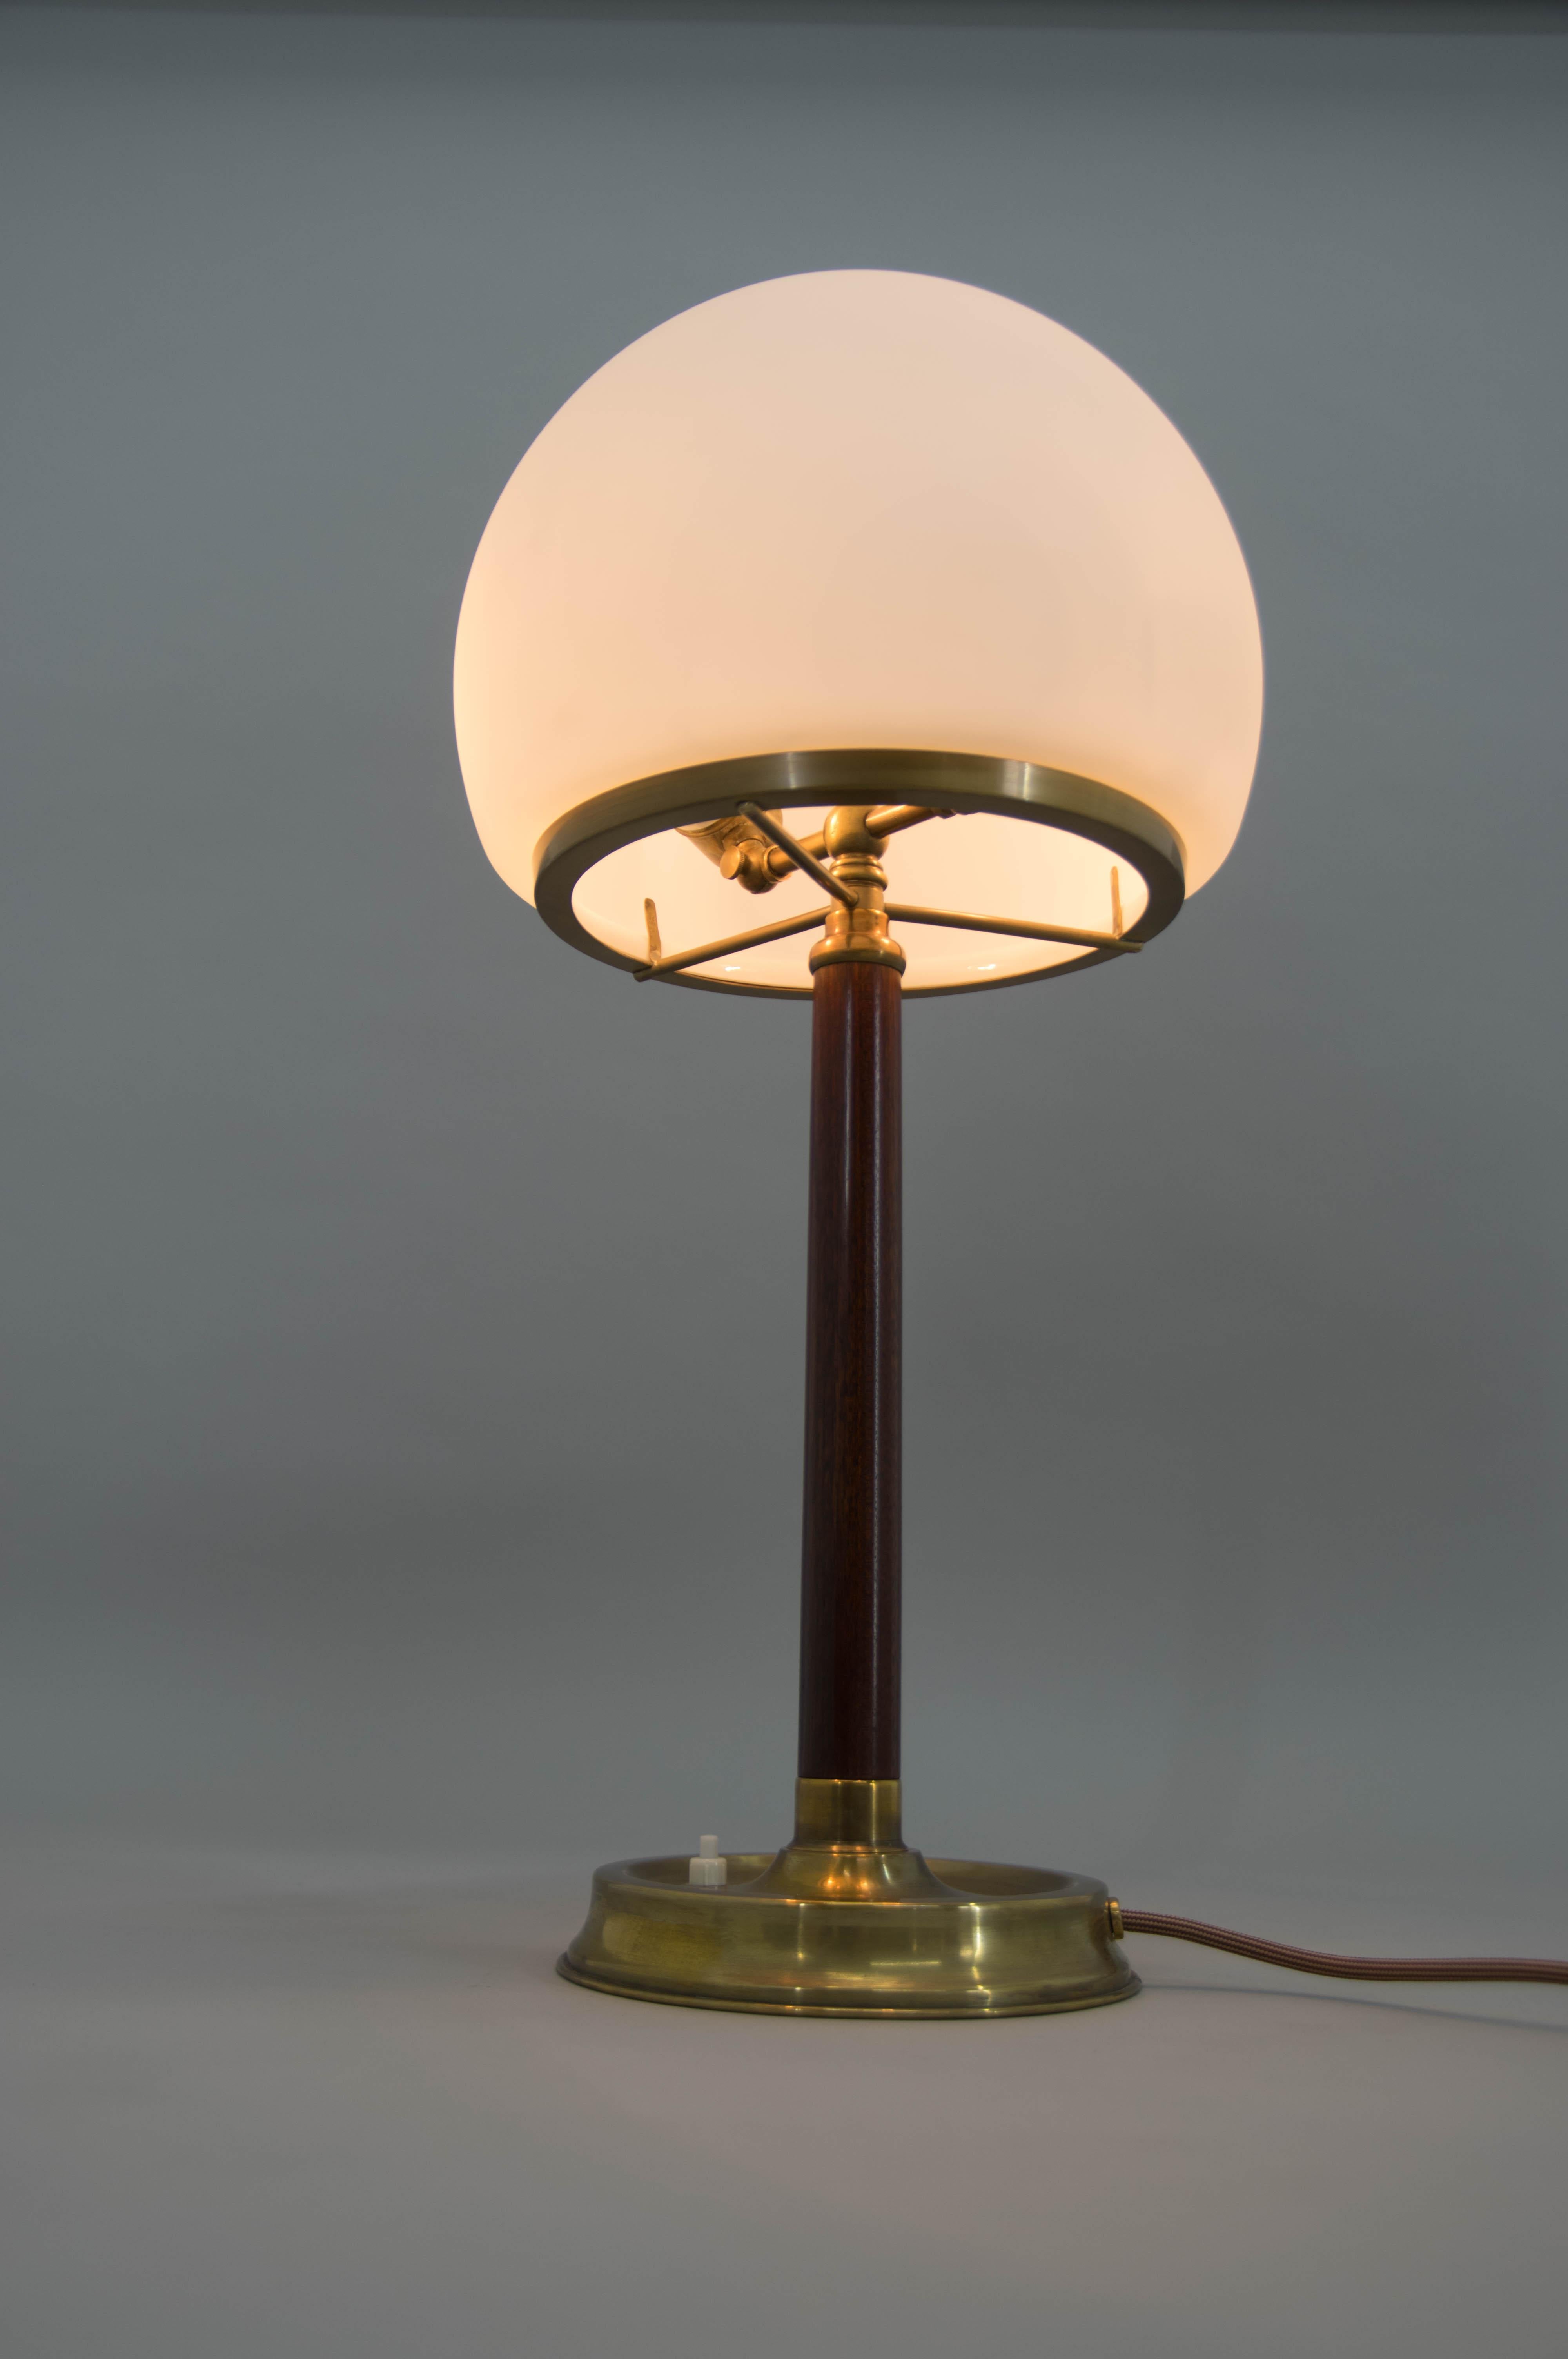 This beautiful elegant table lamp is attributed to Adolf Loos and was executed by IAS by Franta Anyz for a luxury villa in Prague.
Item was carefully restored and is in perfect condition.
Each original socket has its own joint so that it can be